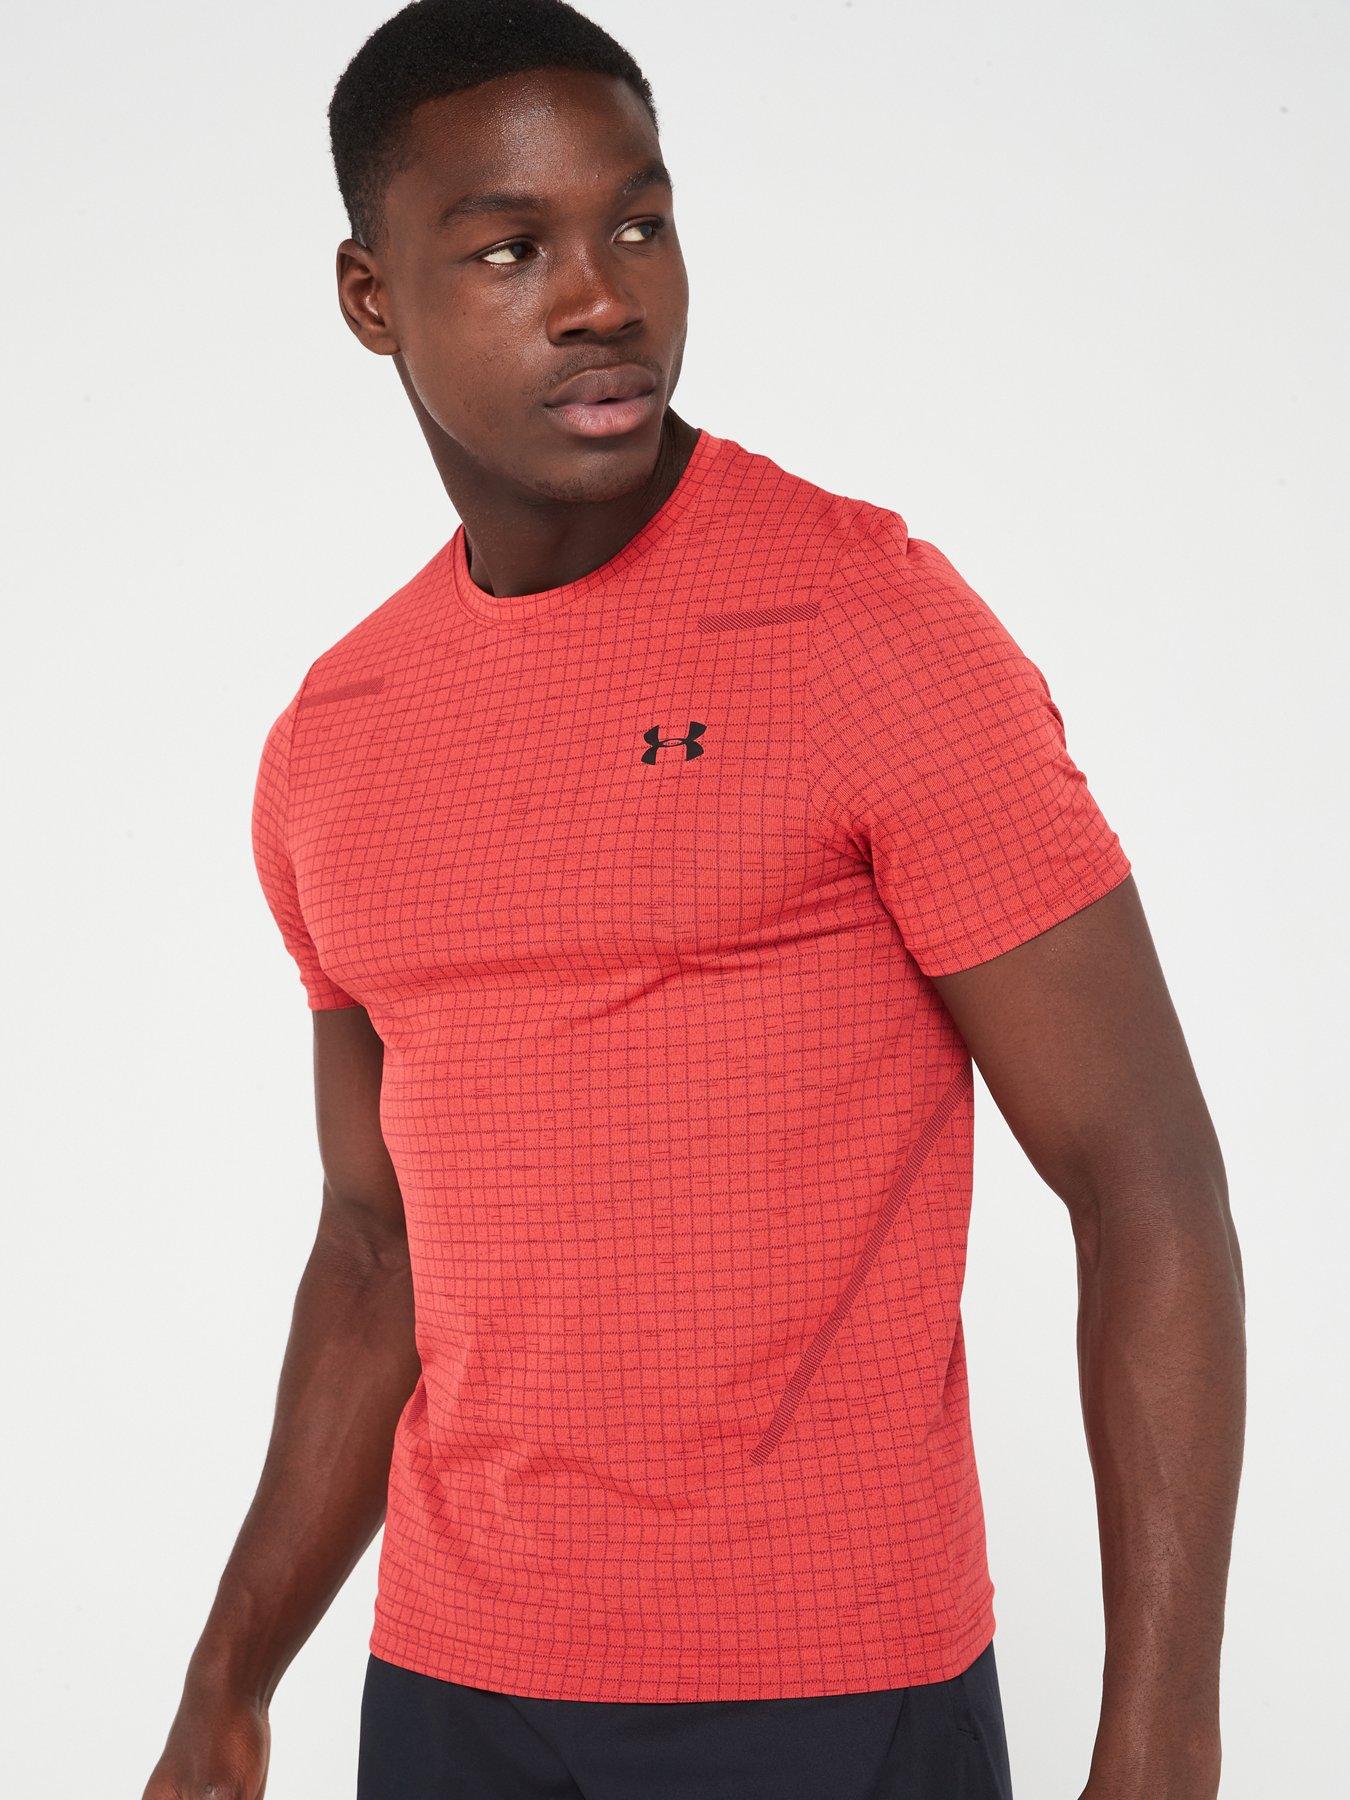 UNDER ARMOUR T-shirt SEAMLESS GRID with mesh